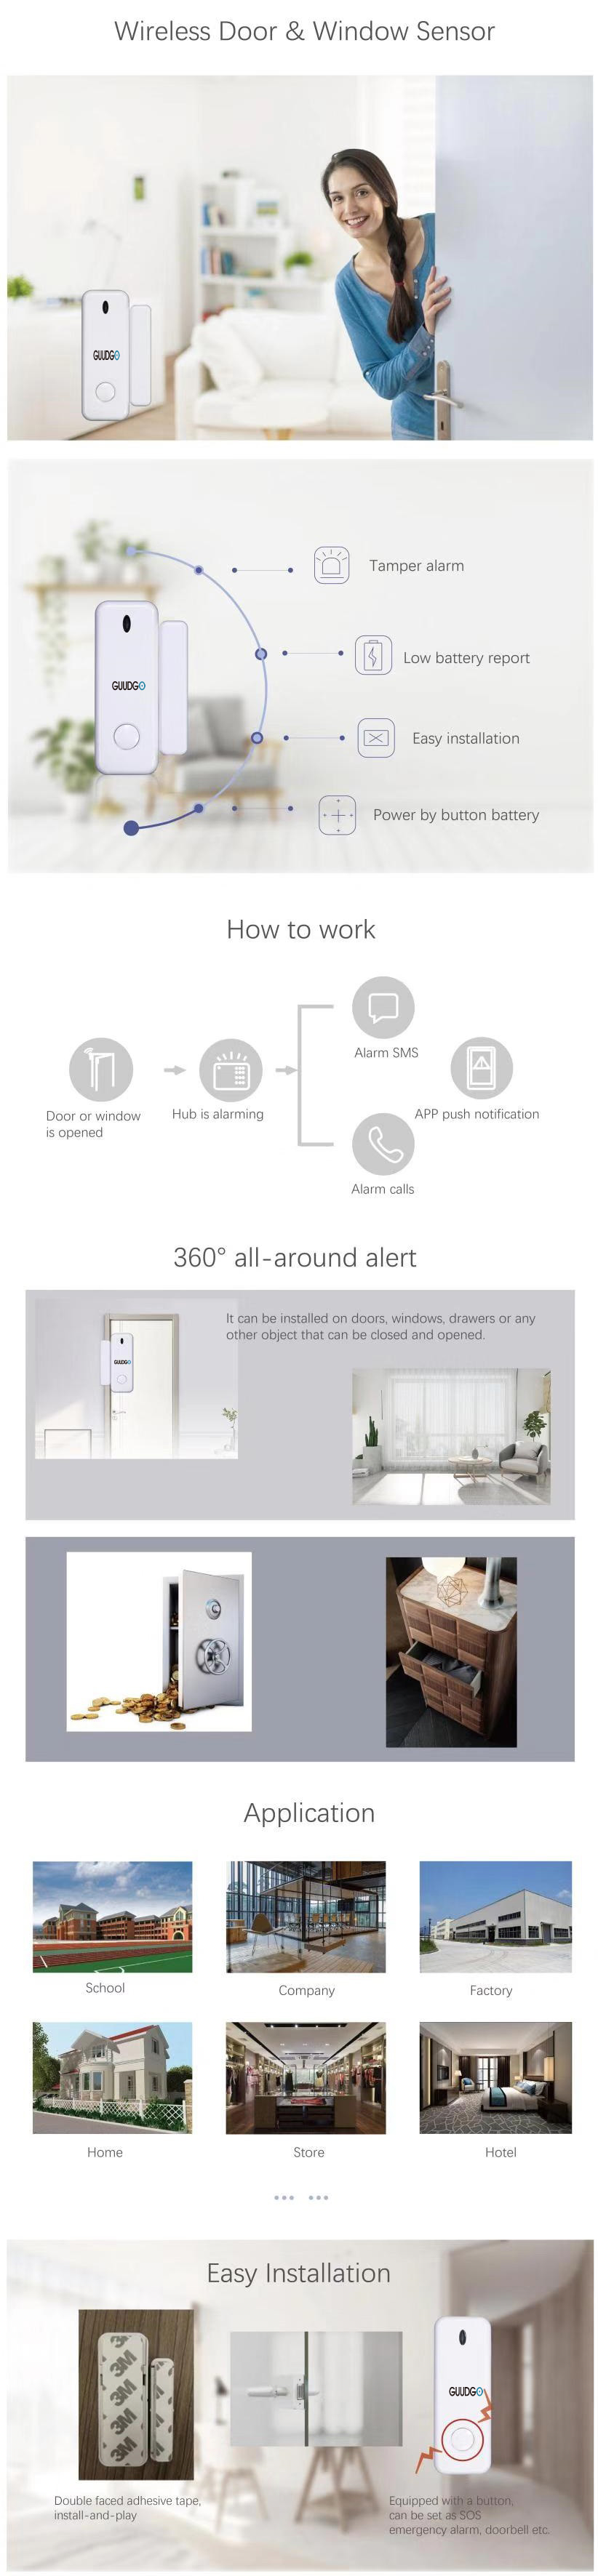 GUUDGO-Tuya-APP-Smart-WiFi-GSM-Home-Security-Alarm-System-Sensors-Home-Alarm-433MHz-Compatible-With--1601246-2